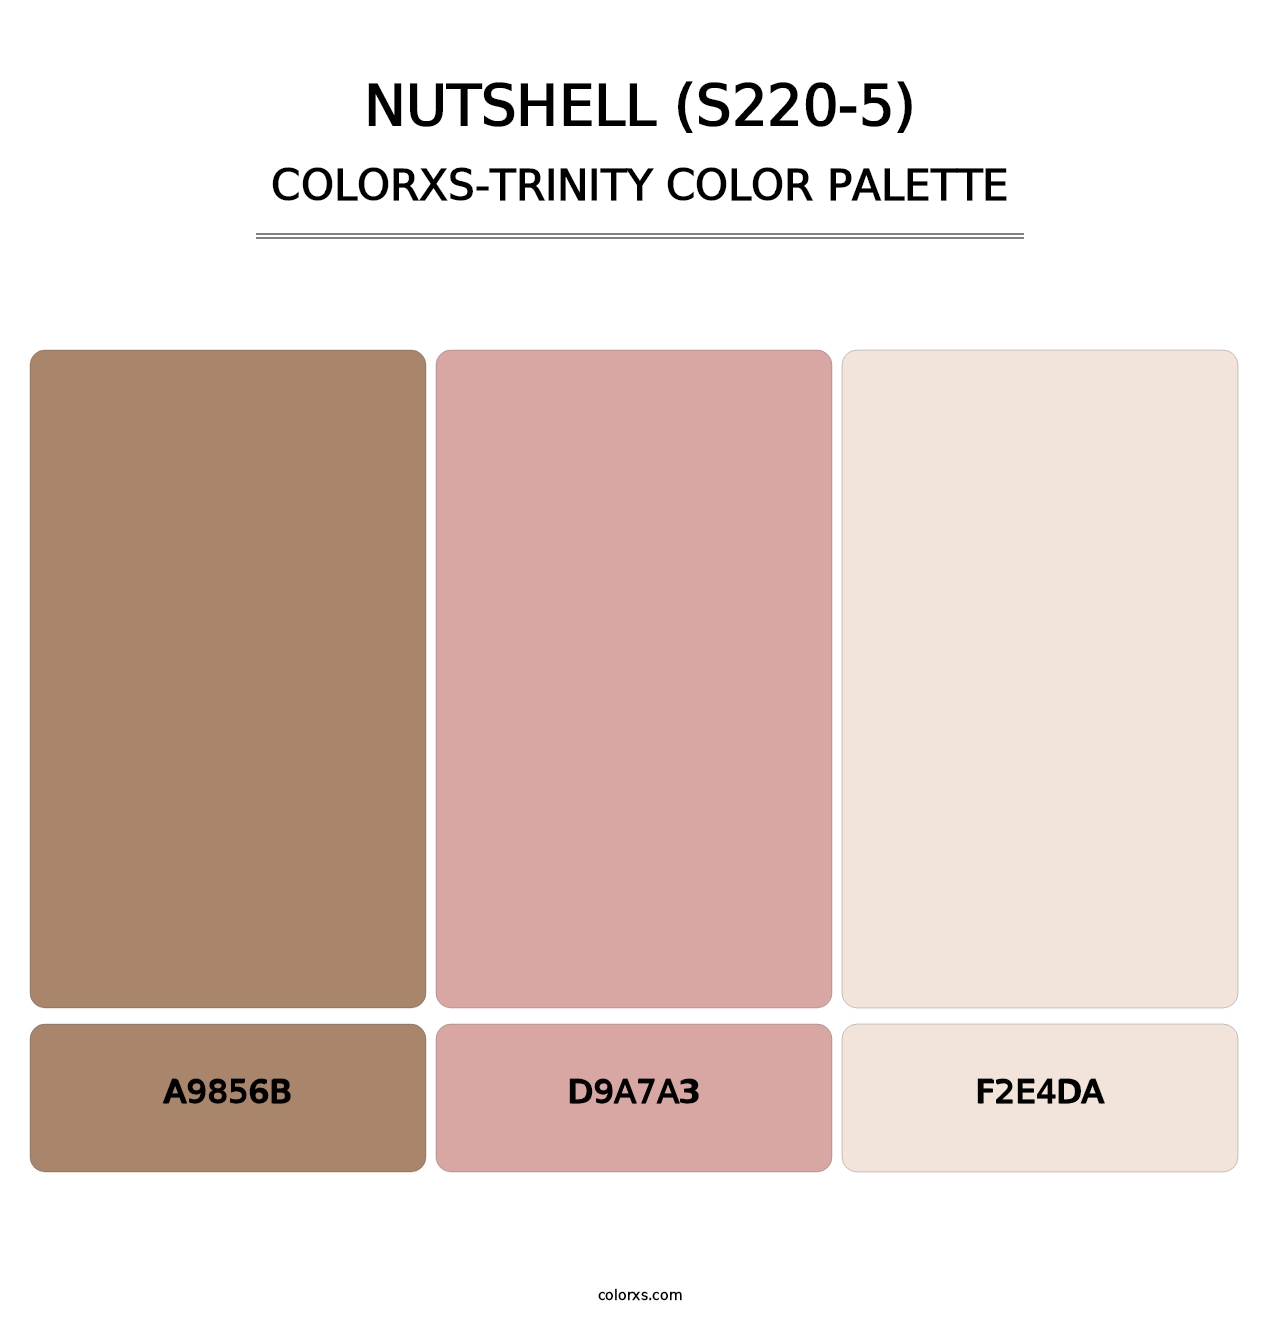 Nutshell (S220-5) - Colorxs Trinity Palette